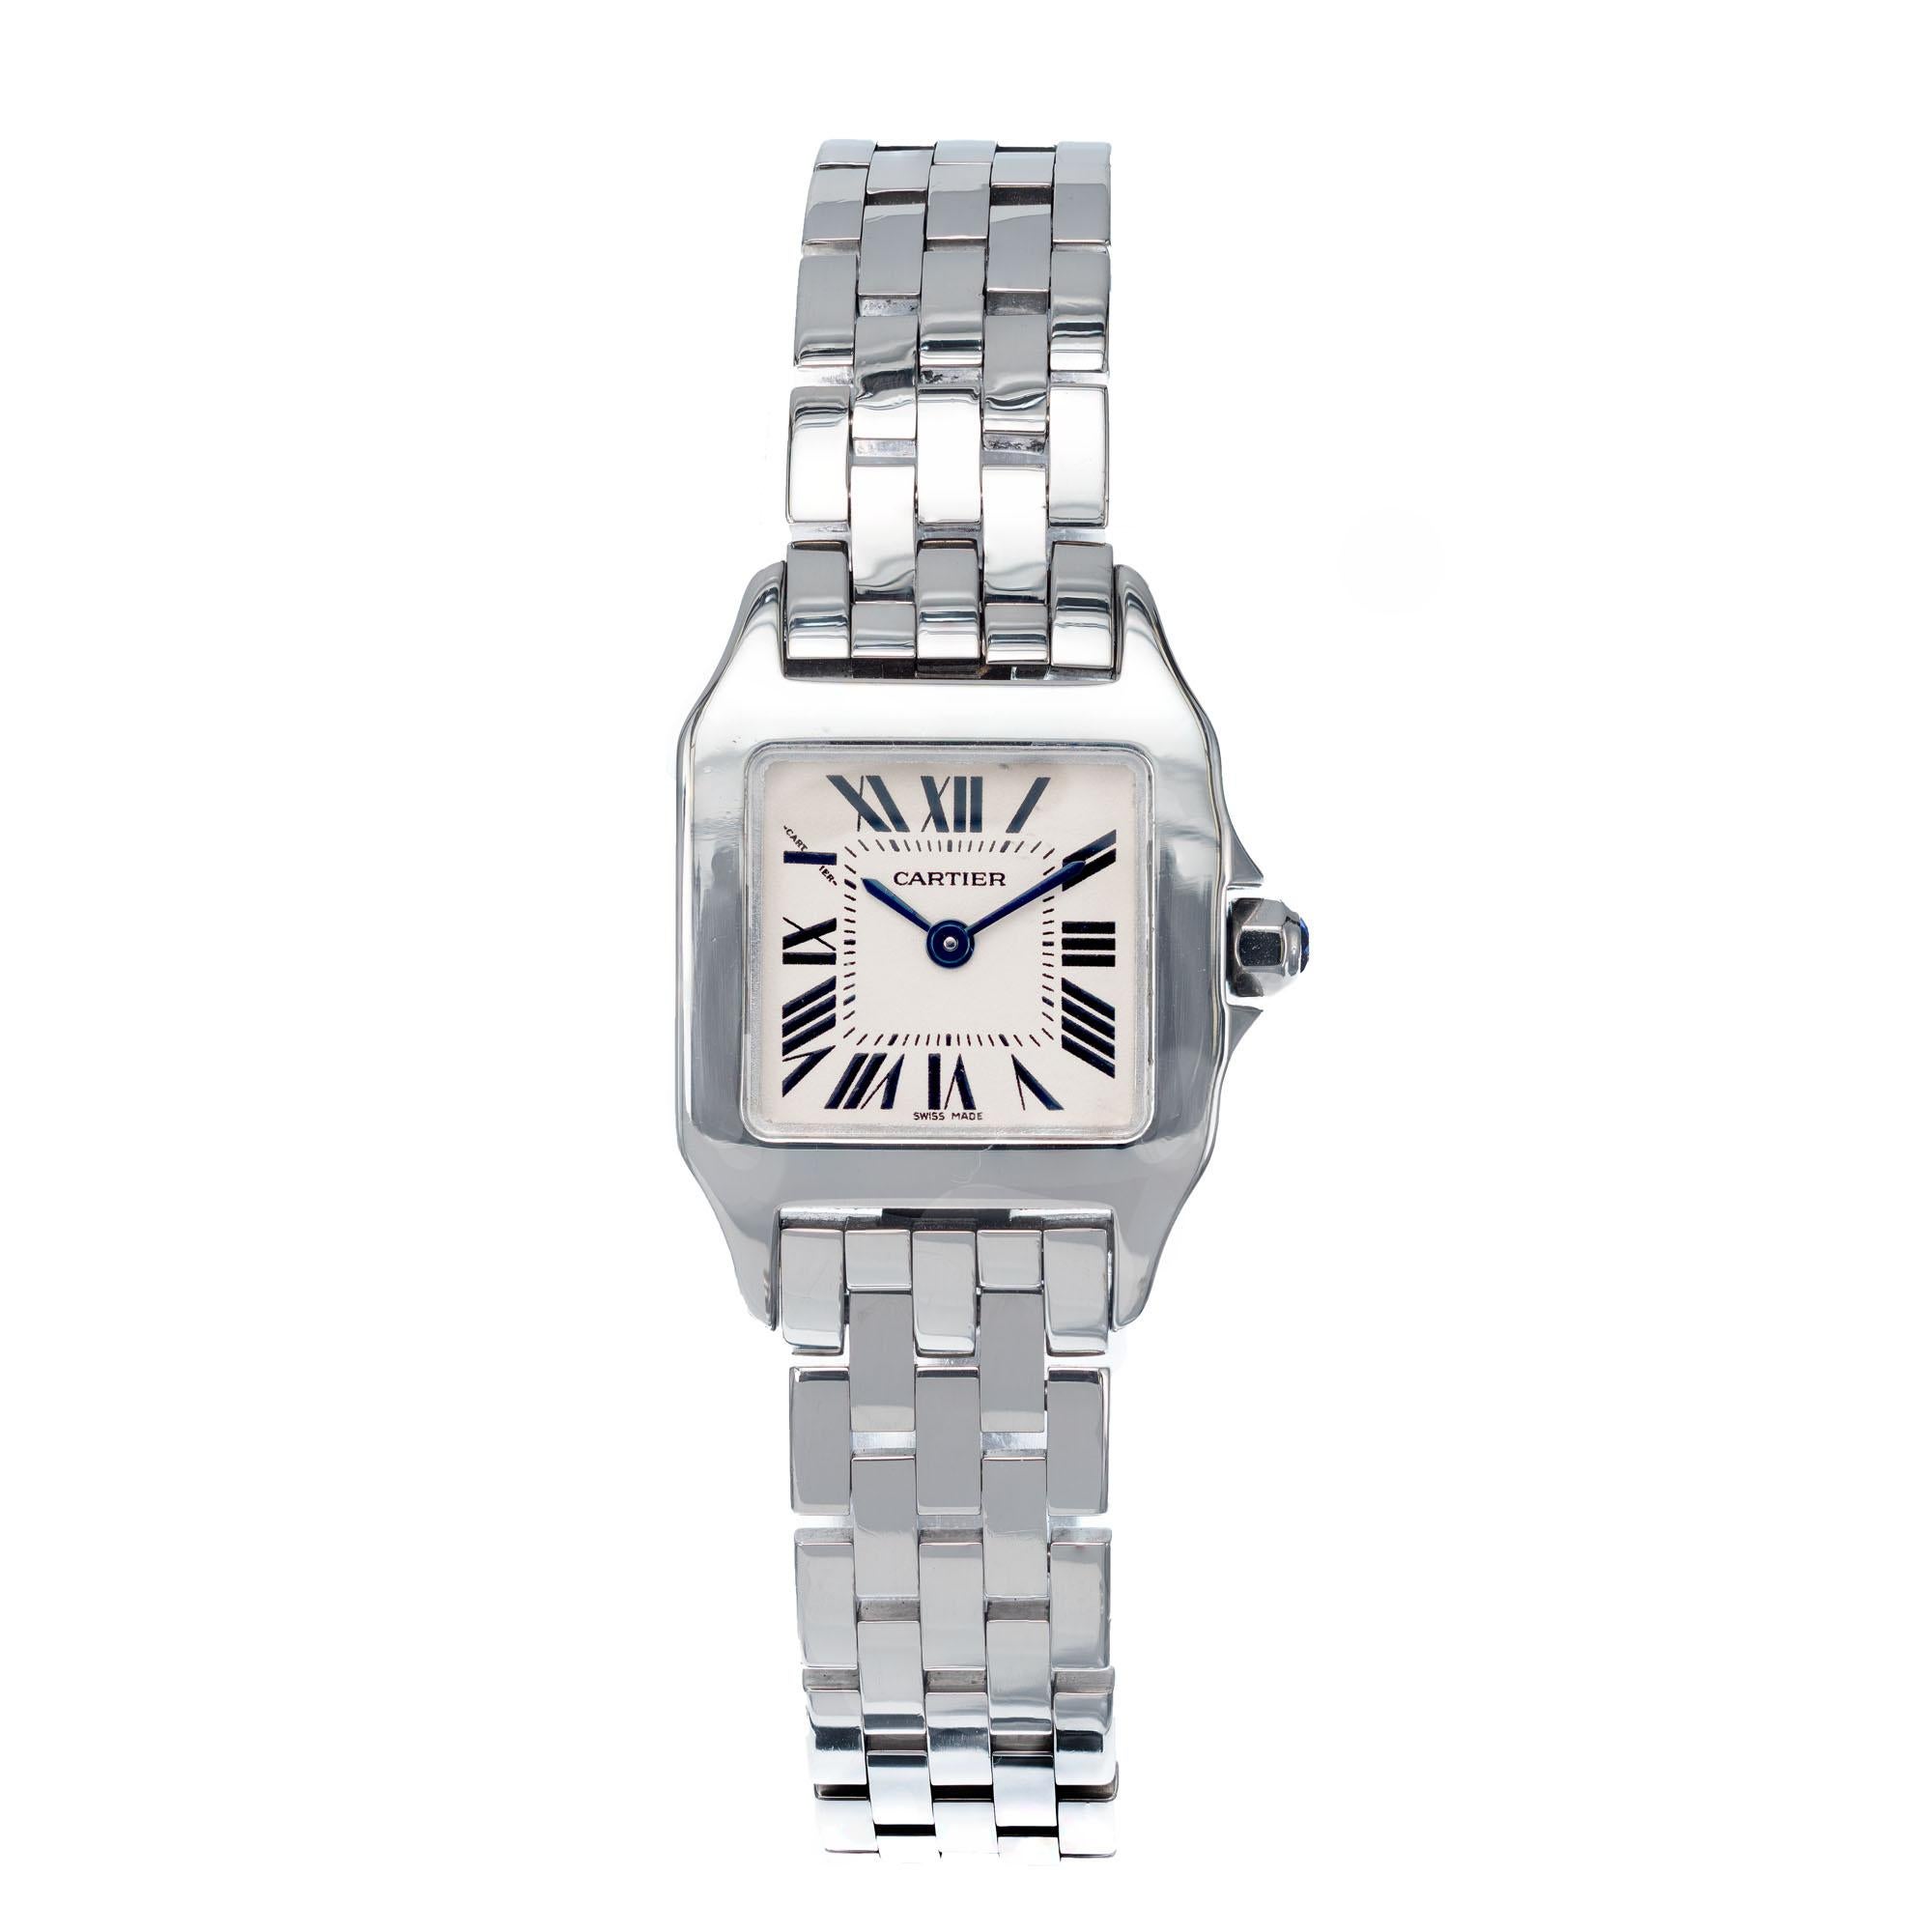 Small size Cartier vintage Demoiselle stainless steel wristwatch with quartz movement 

Length: 28.35mm
Width: 20.30mm
Band width at case: 12mm
Case thickness: 5.59mm
Band: Stainless steel panther
Crystal: sapphire
Dial: cream with Roman